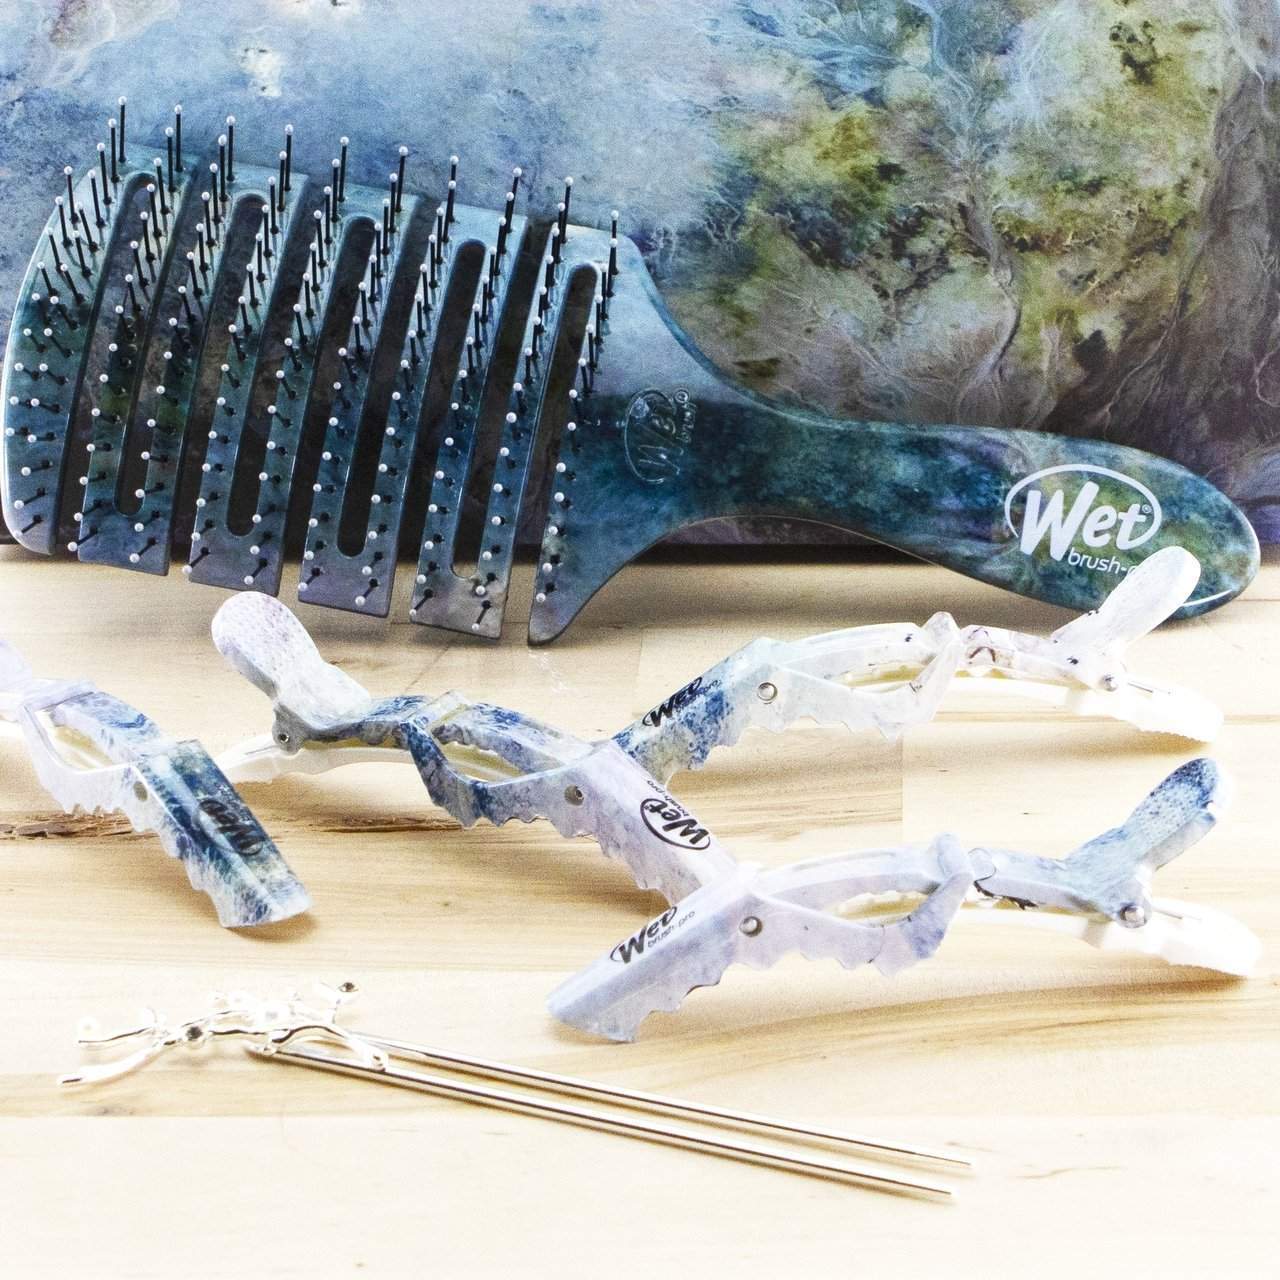 Wet Brush Bio Ionic Hair Brush and Clip Set-Wet Brush-Brand_Wet Brush,Collection_Gifts,Collection_Hair,Collection_Tools and Brushes,FABS_Friday2022,Gifts and Sets,Gifts_Under 25,Tool_Brushes,Tool_Hair Tools,Tool_Vented Brushes,WET_Flex Dry,WET_Kits and Sets